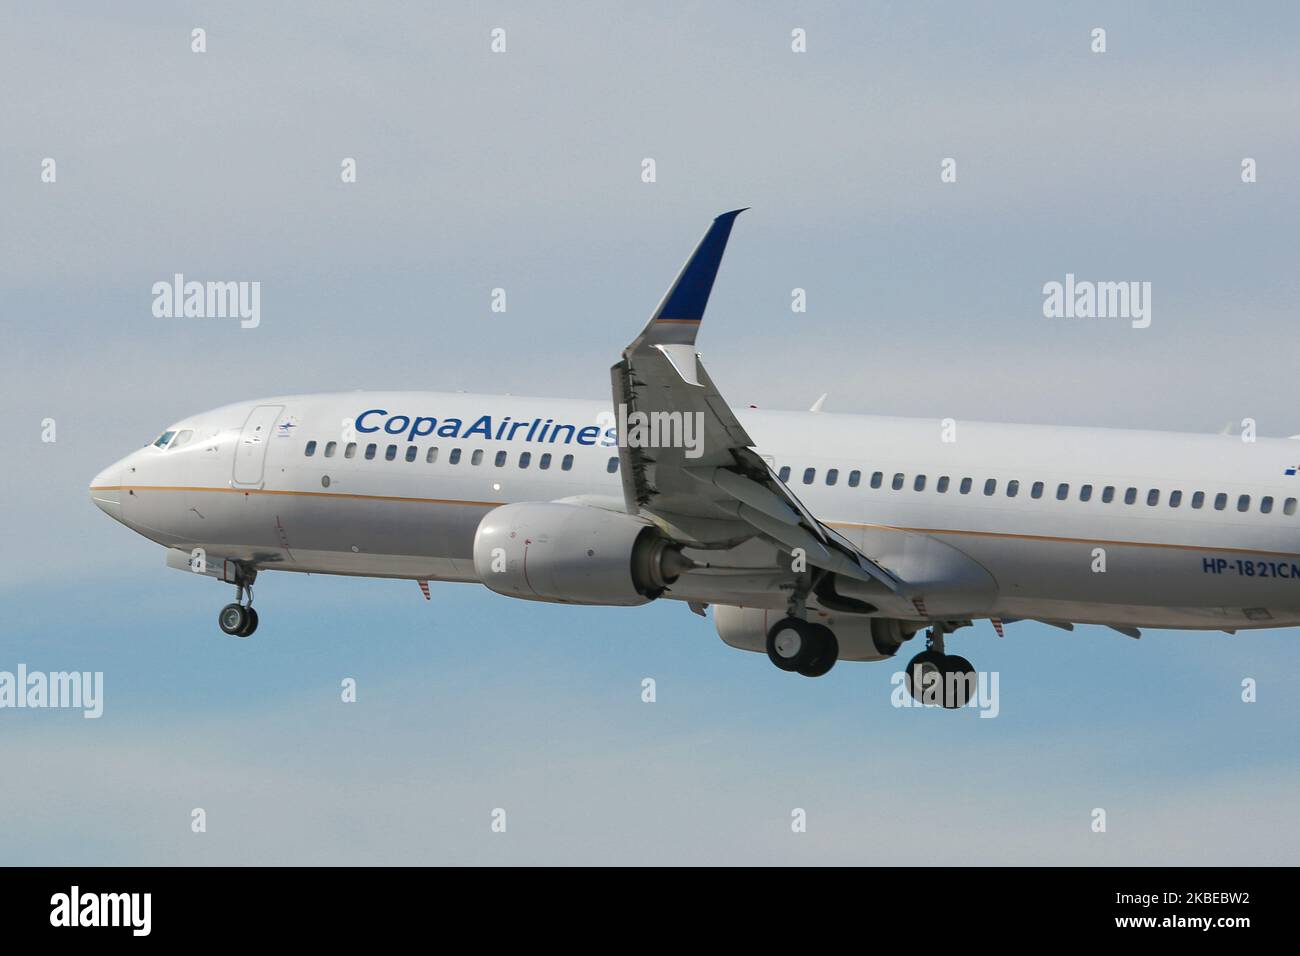 Copa Airlines Boeing 737-800, a 737NG variant, specifically 737-8V3(WL) aircraft as seen on final approach with landing gear extended, landing at New York John F. Kennedy JFK International Airport. The airplane has the registration HP-1821CMP and 2x CFMI jet engines. CopaAirlines CM CMP, Compañía Panameña de Aviación in Spanish, is the flag carrier of Panama, based with a hub at Tocumen Int. Airport PTY MPTO in Panama City, The airline is a member of Star Alliance aviation alliance. NYC, USA - November 14, 2019 (Photo by Nicolas Economou/NurPhoto) Stock Photo